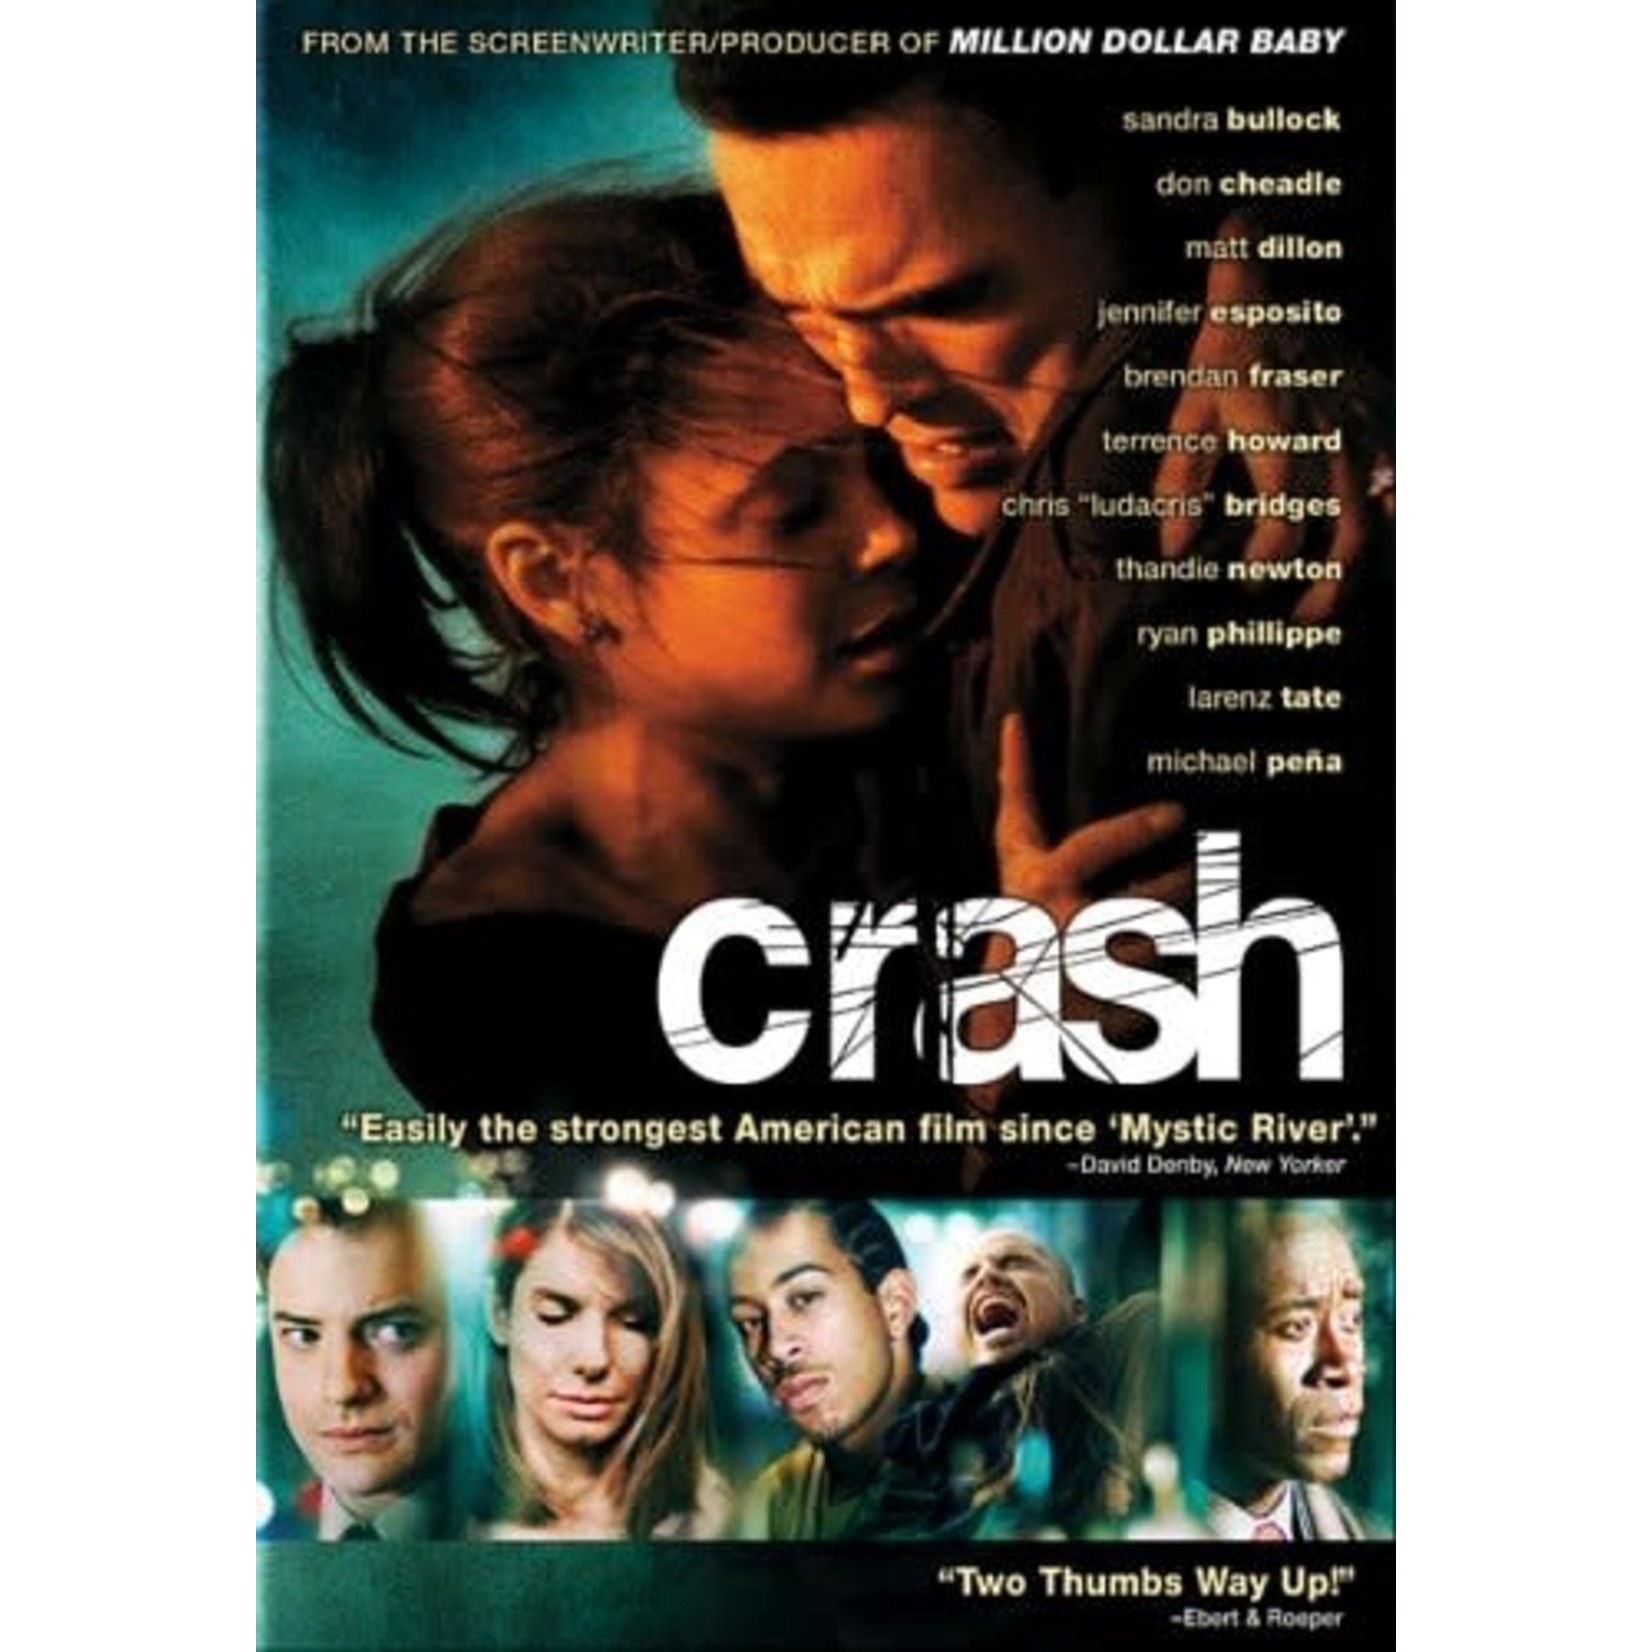 Crash (2004): The Subject of 2 Lawsuits